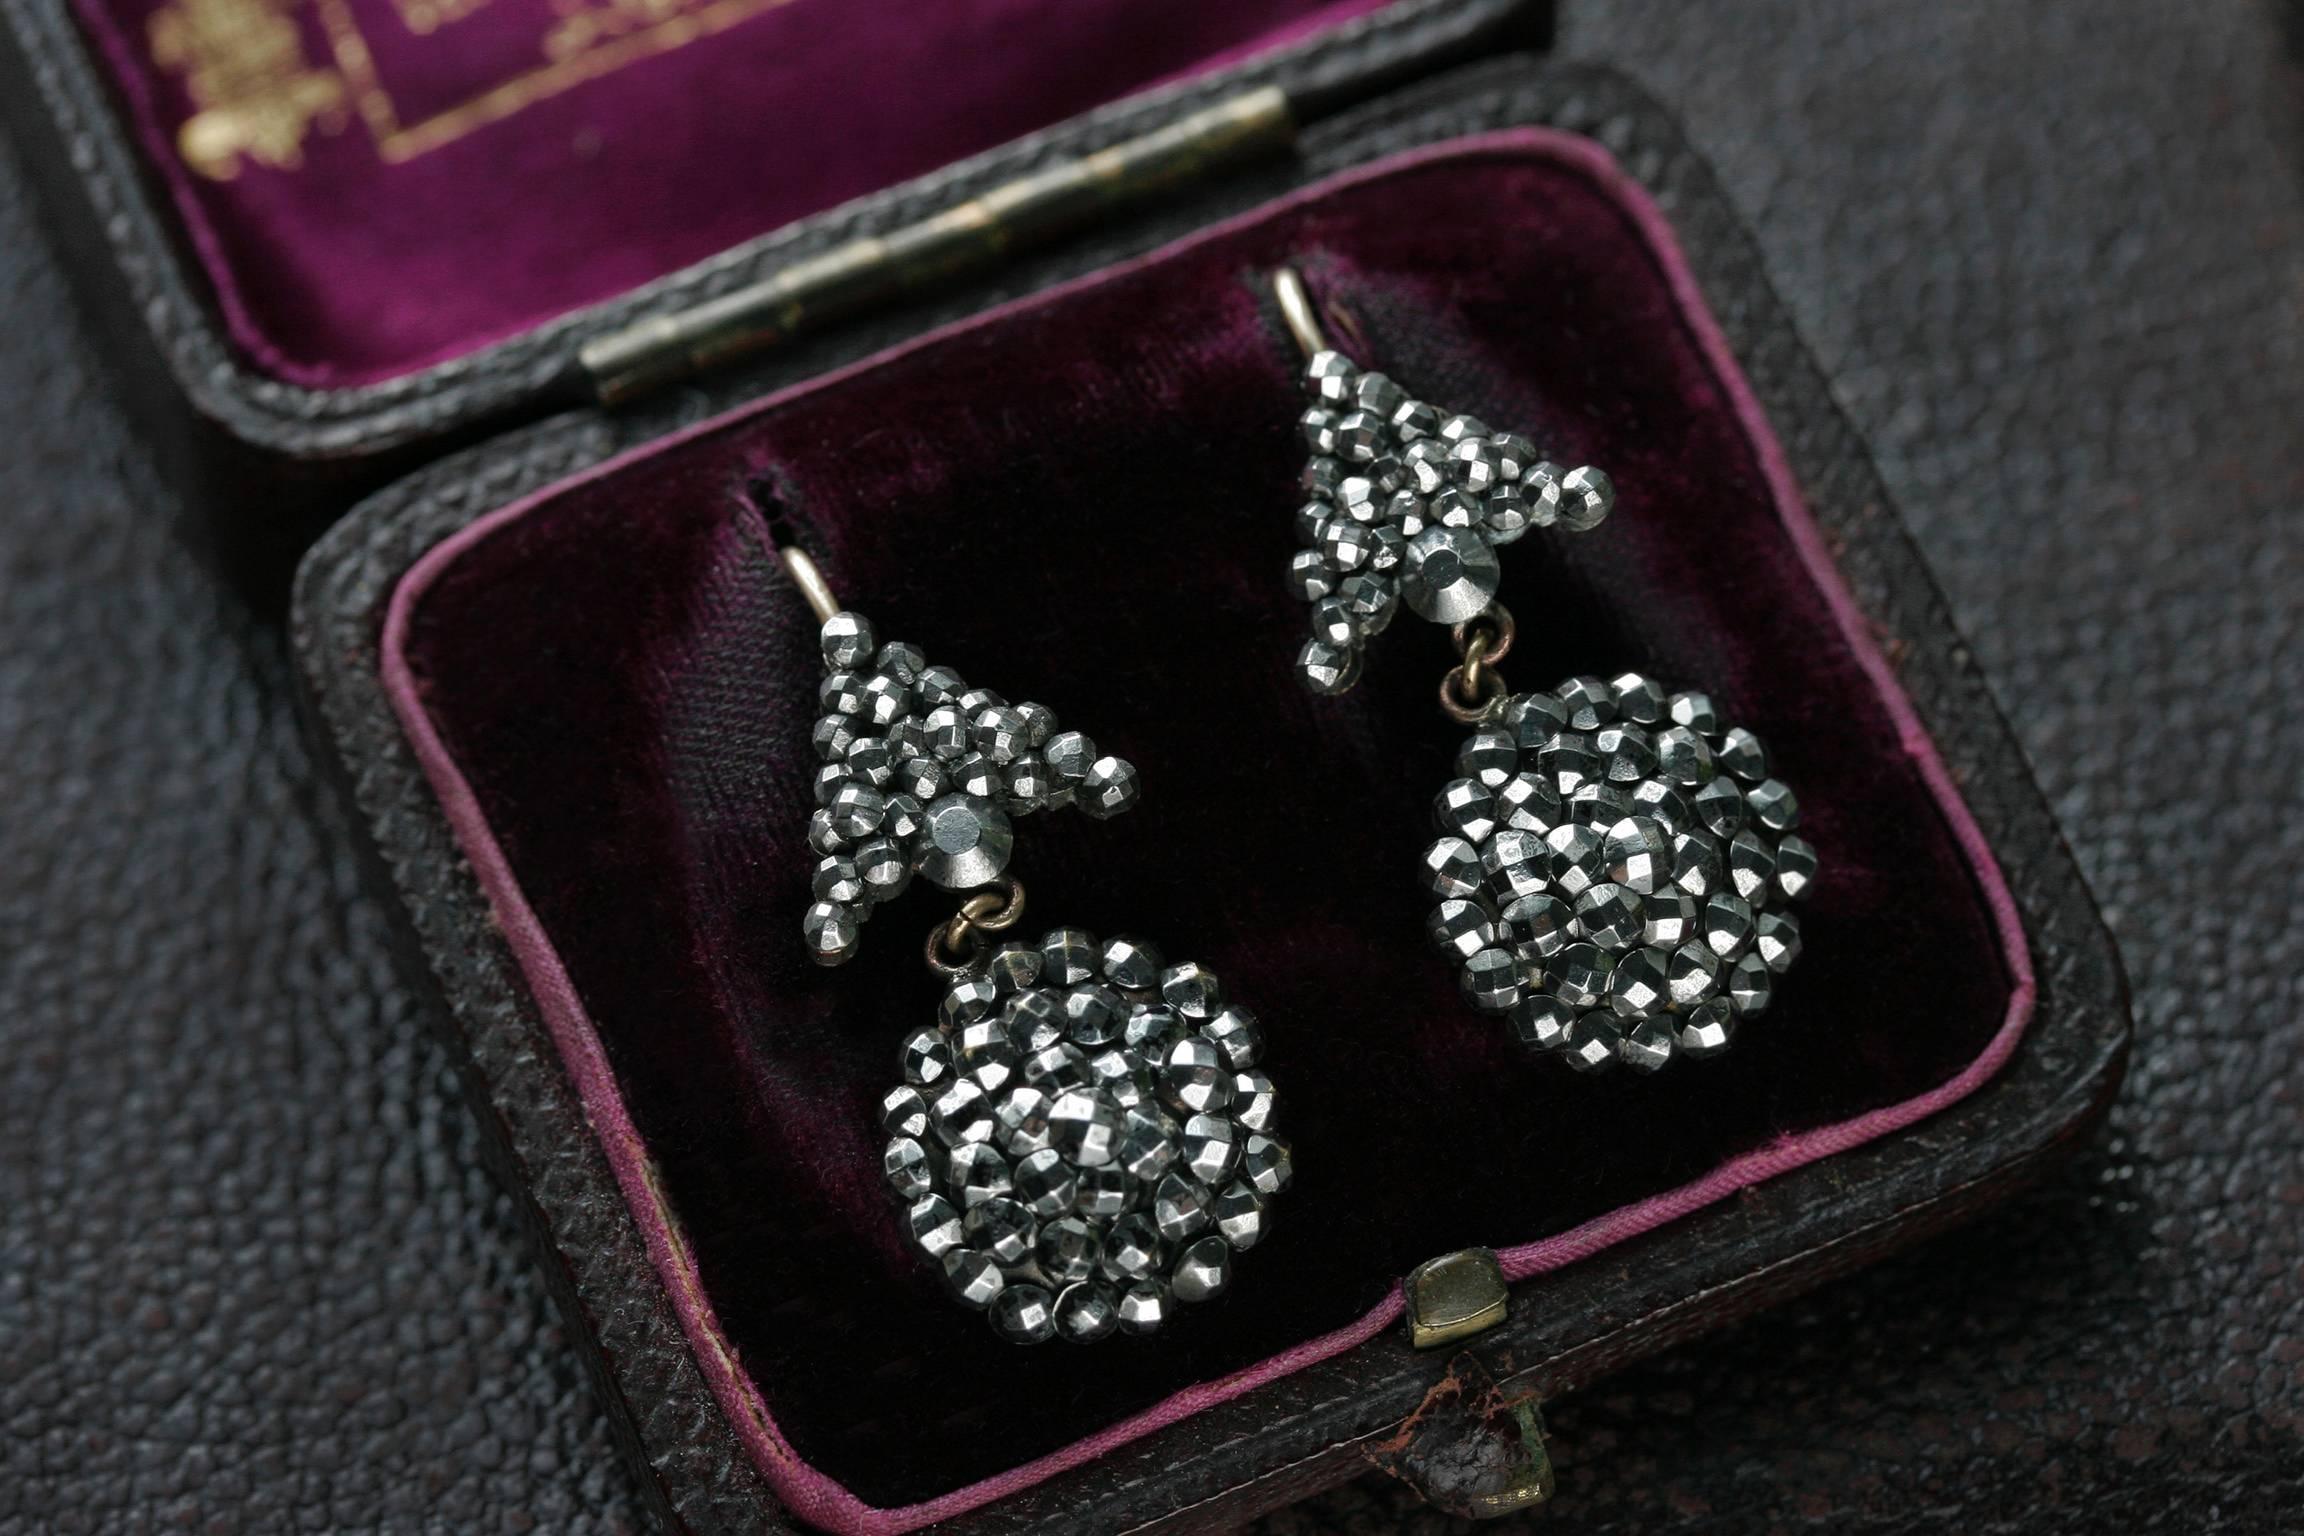 C.1830. An unique and versatile pair of Georgian cut steel earrings. The earrings have an arrow-shaped top and hanging circular bottom, which delightfully dangle and sway when worn. The size and scale of this pair makes the earrings perfect for both